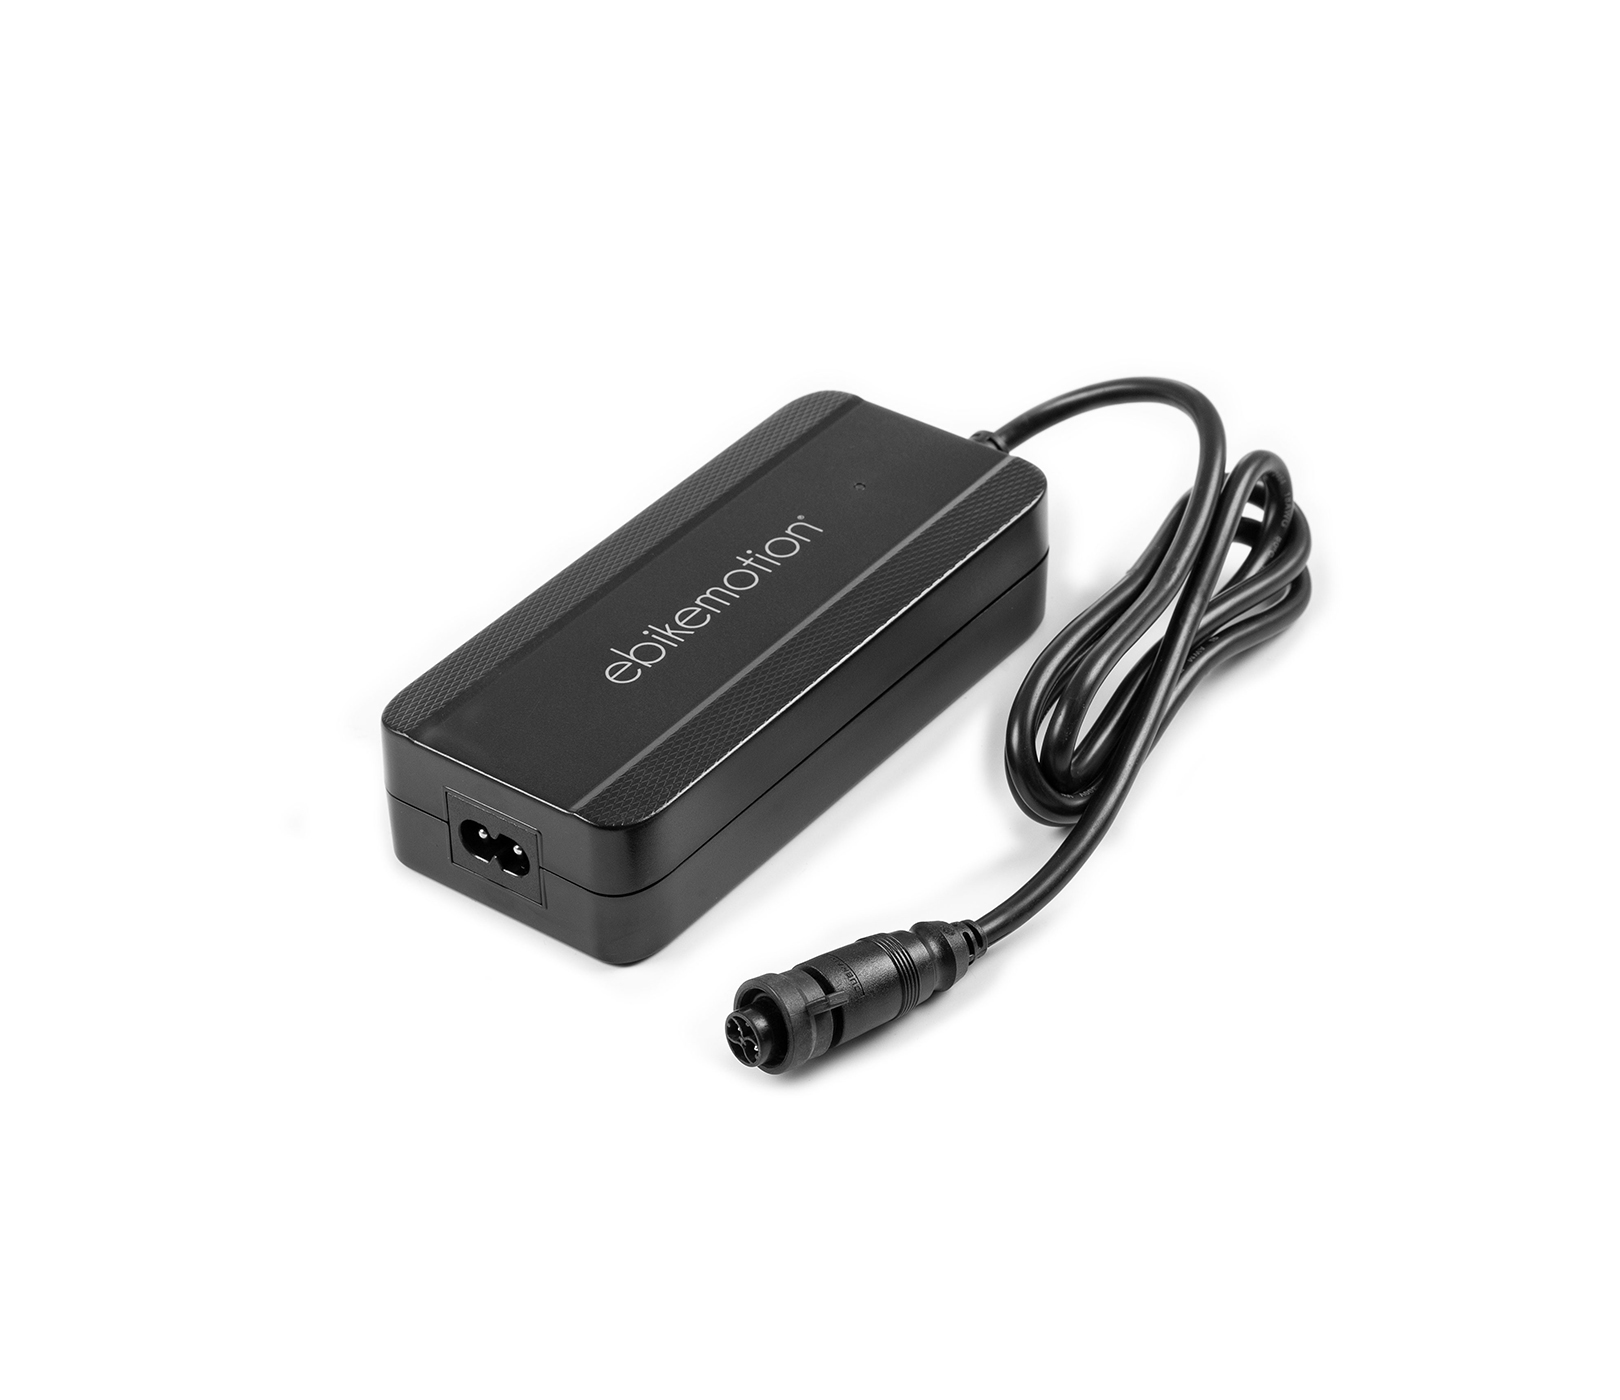 Ebikemotion X35 Charger Without Cable